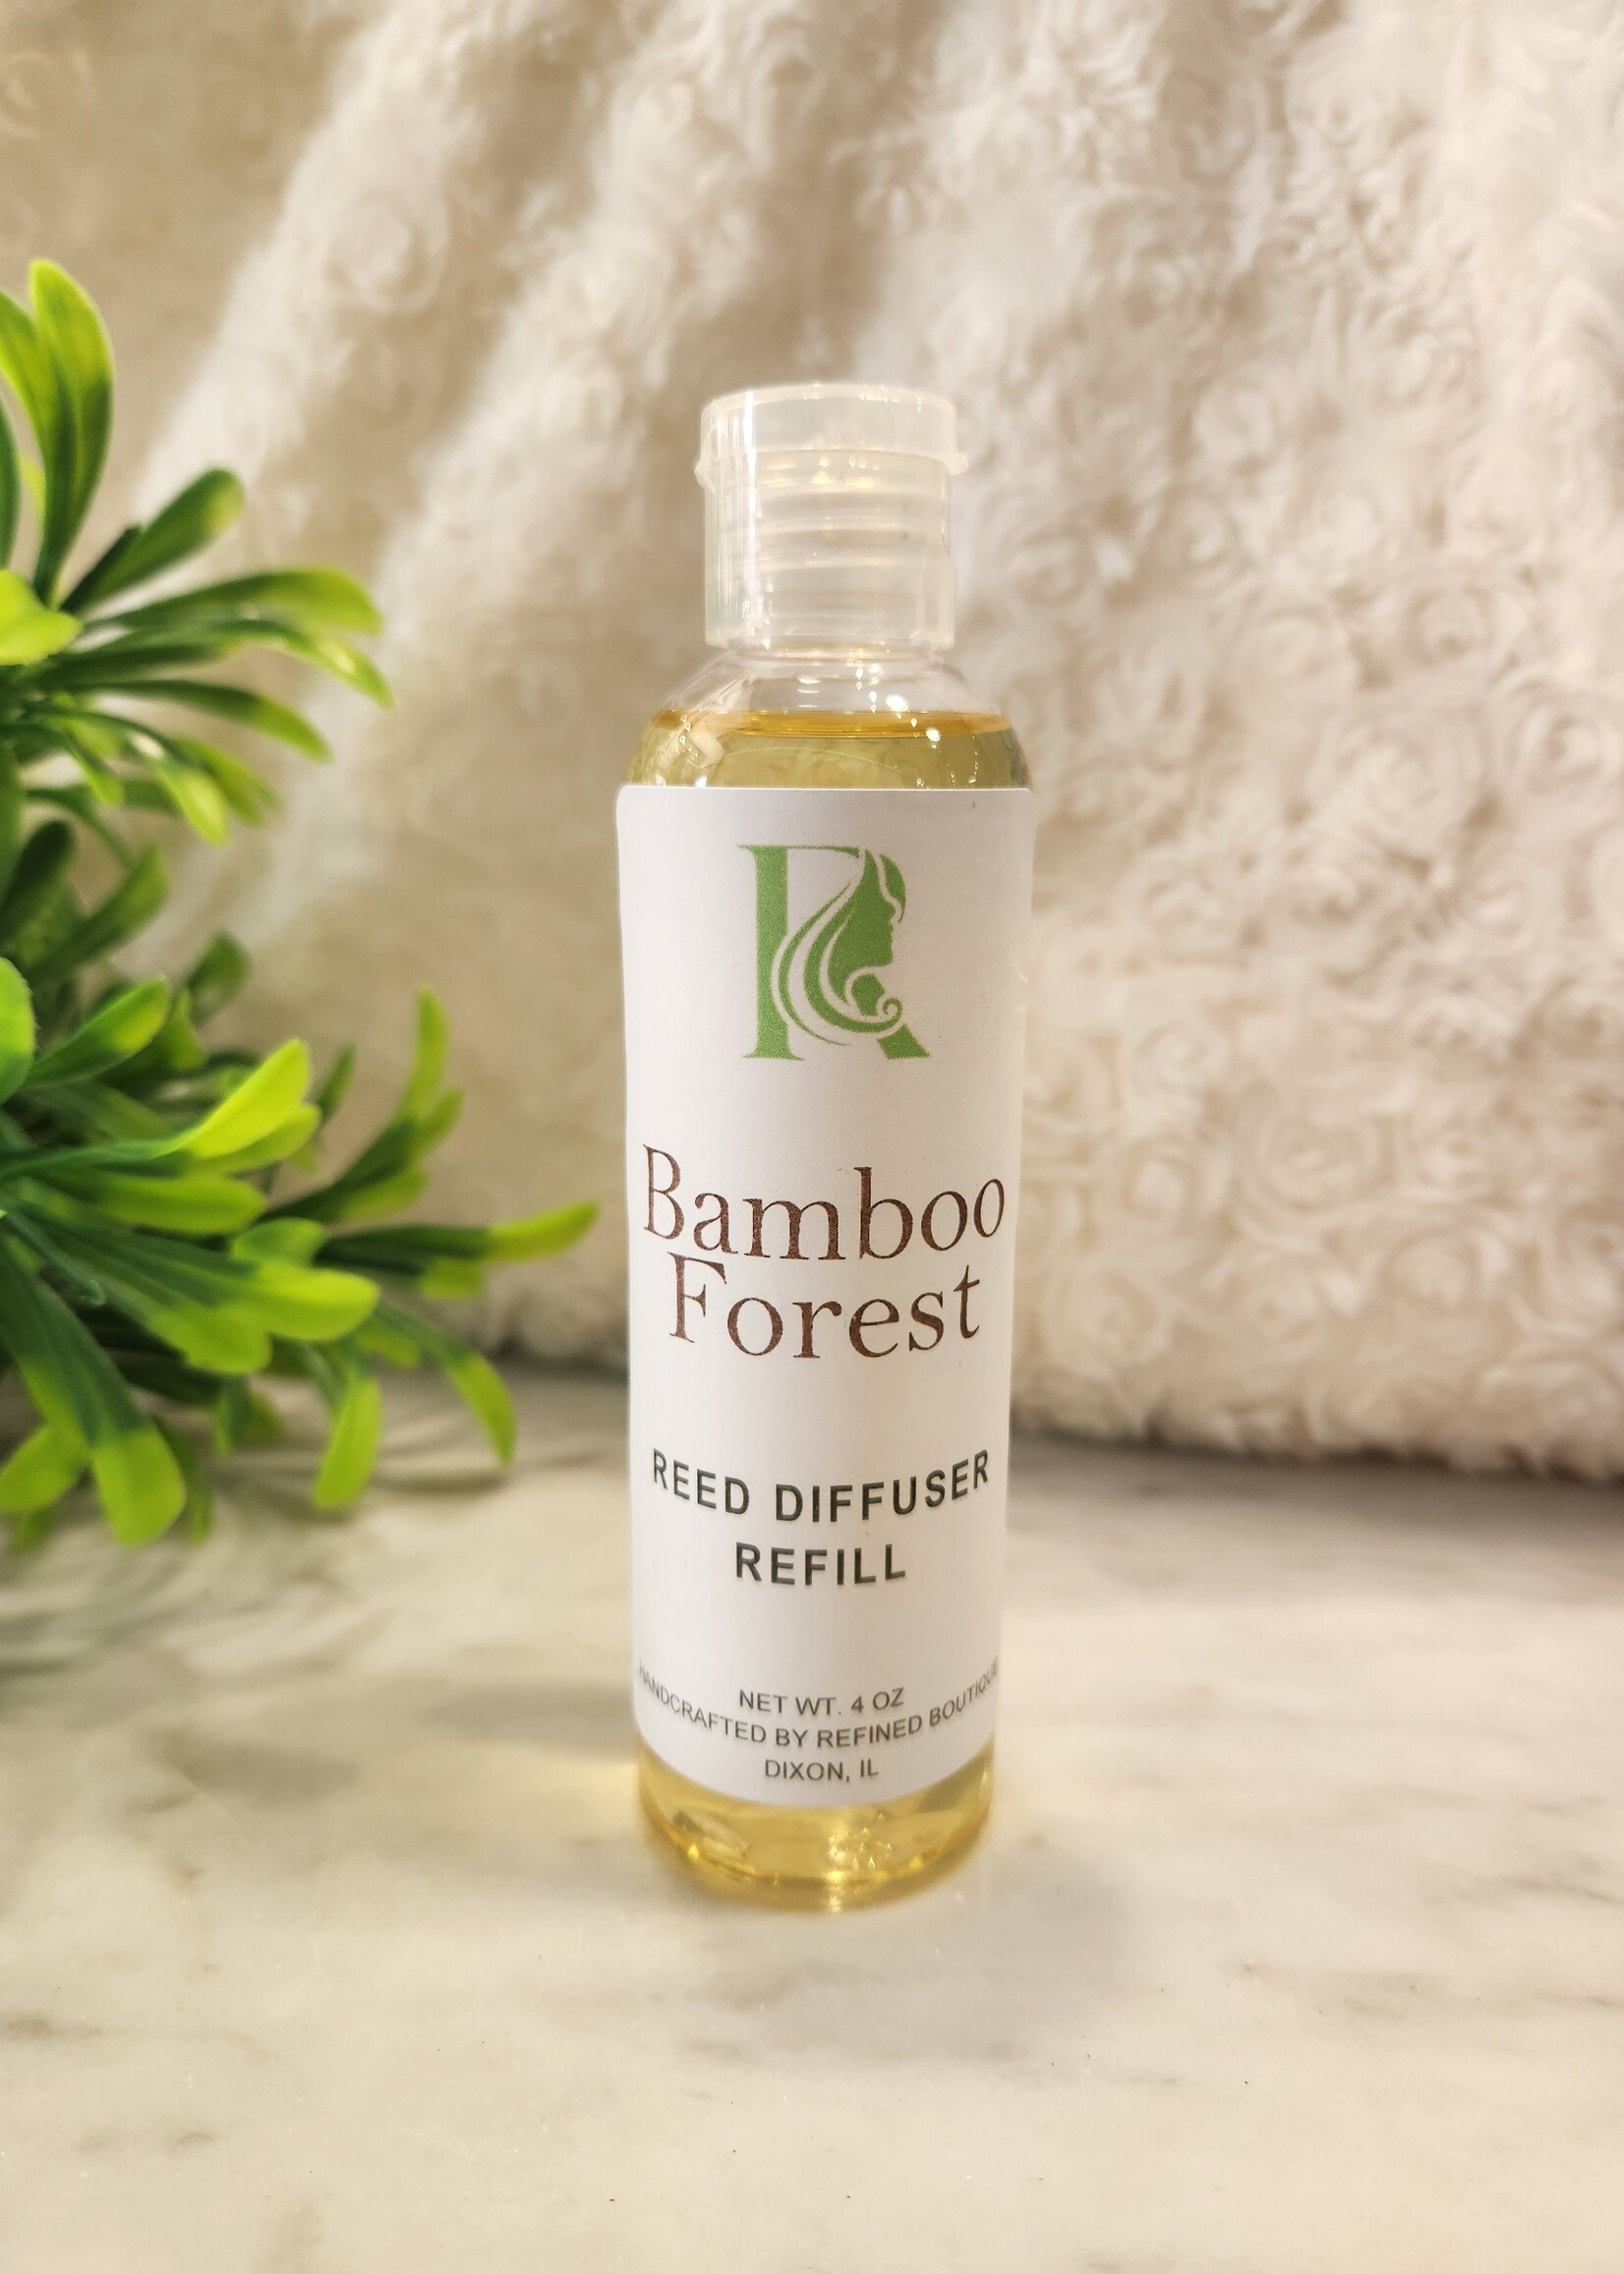 Bamboo Forest Reed Diffuser Refill